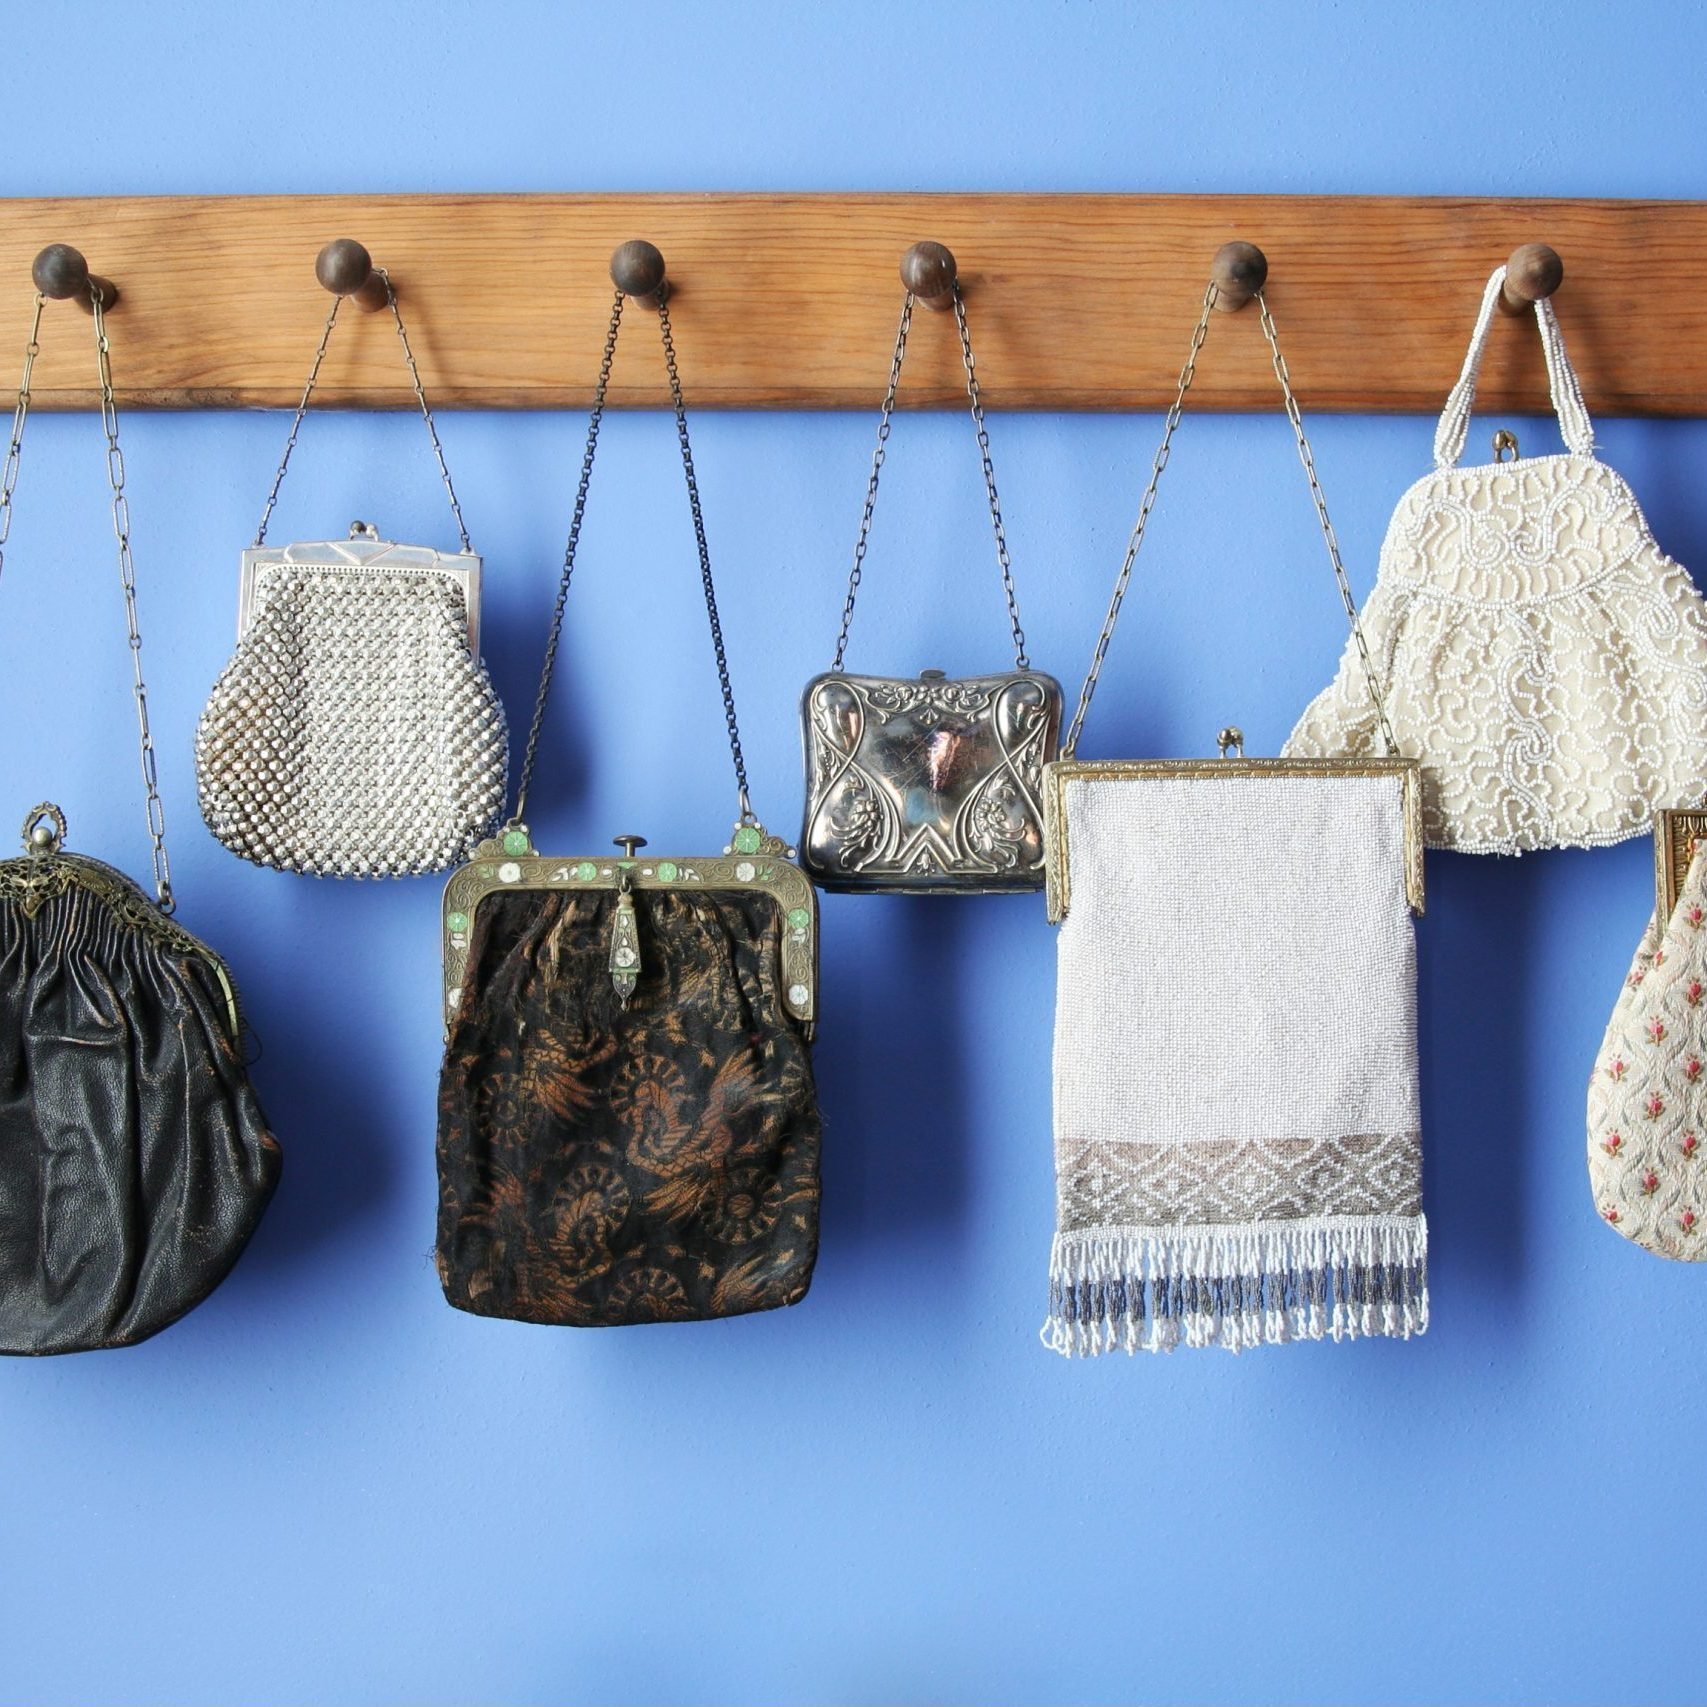 19 BEST Purse Storage Ideas To Organize ALL Your Purses & Bags!